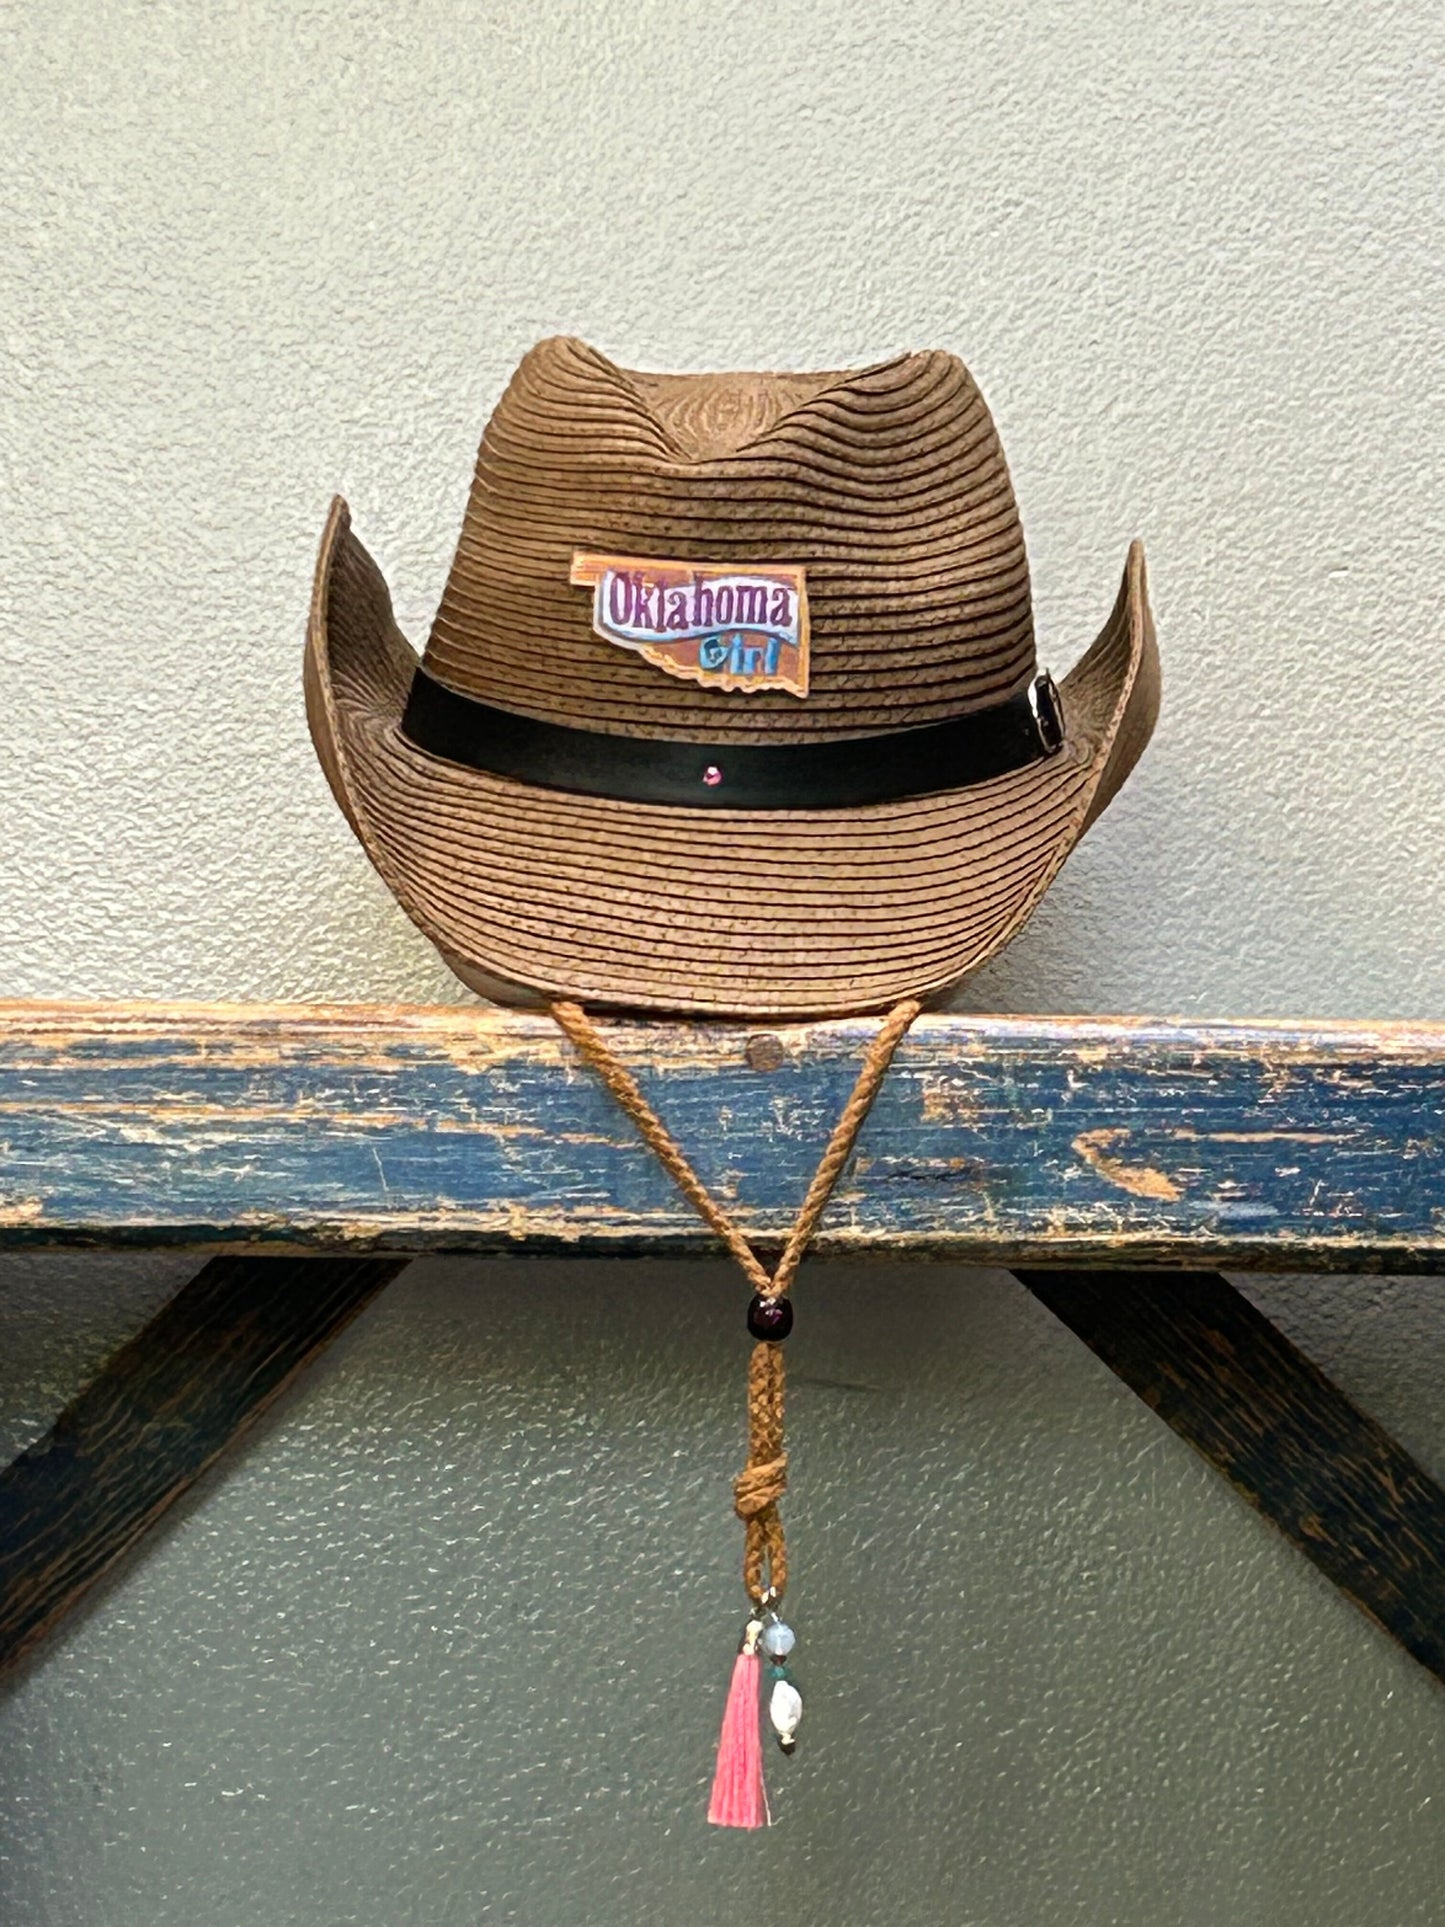 Oklahoma Girl - Patch Cowboy Hat